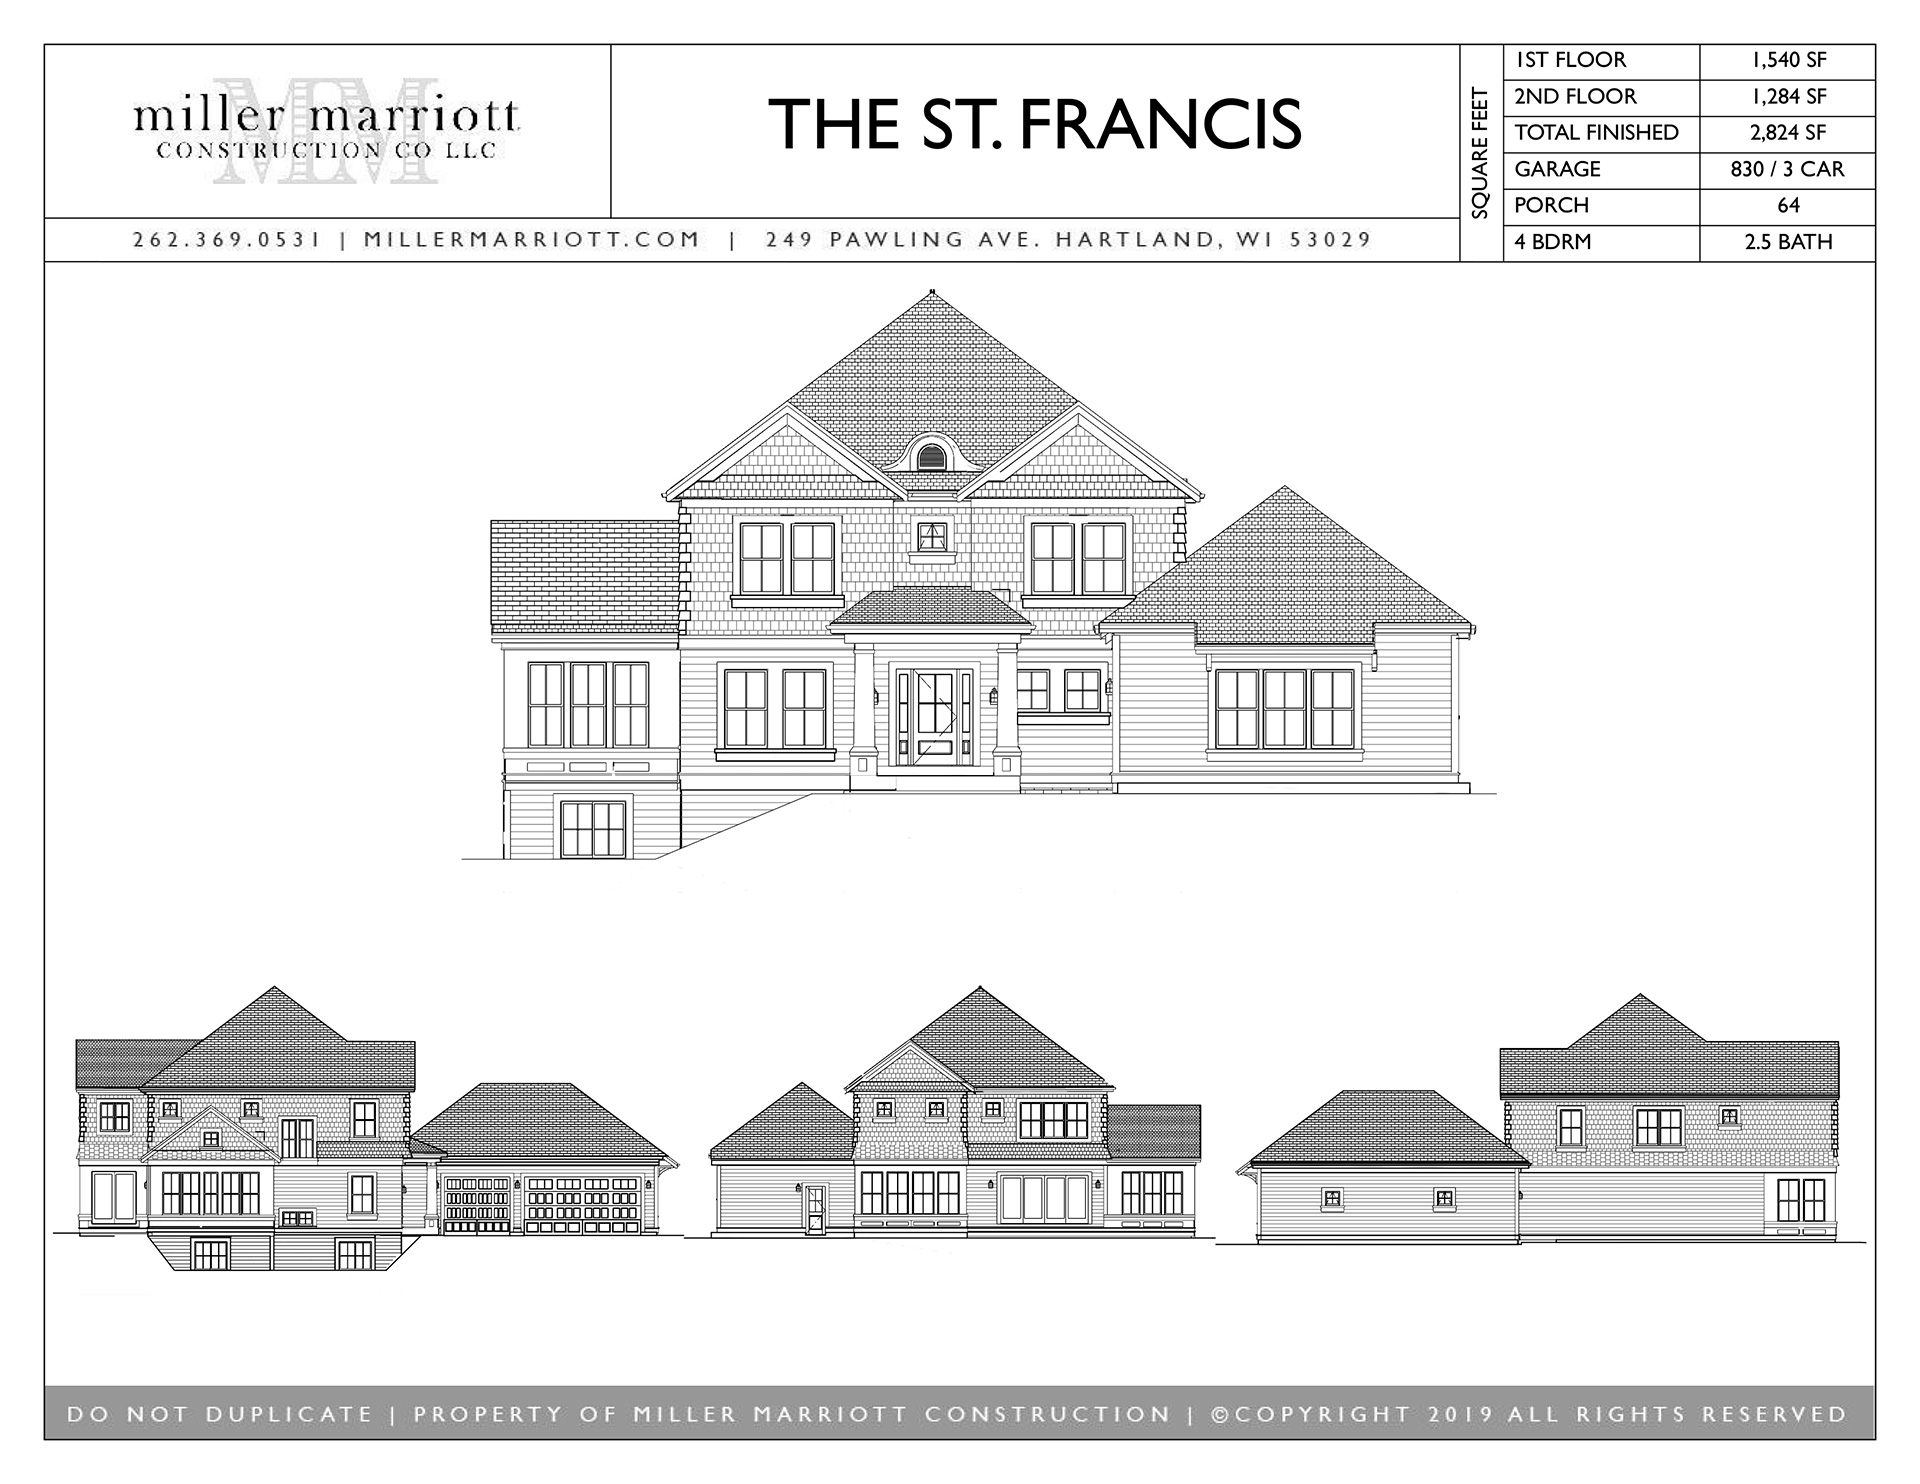 The St. Francis exterior plan